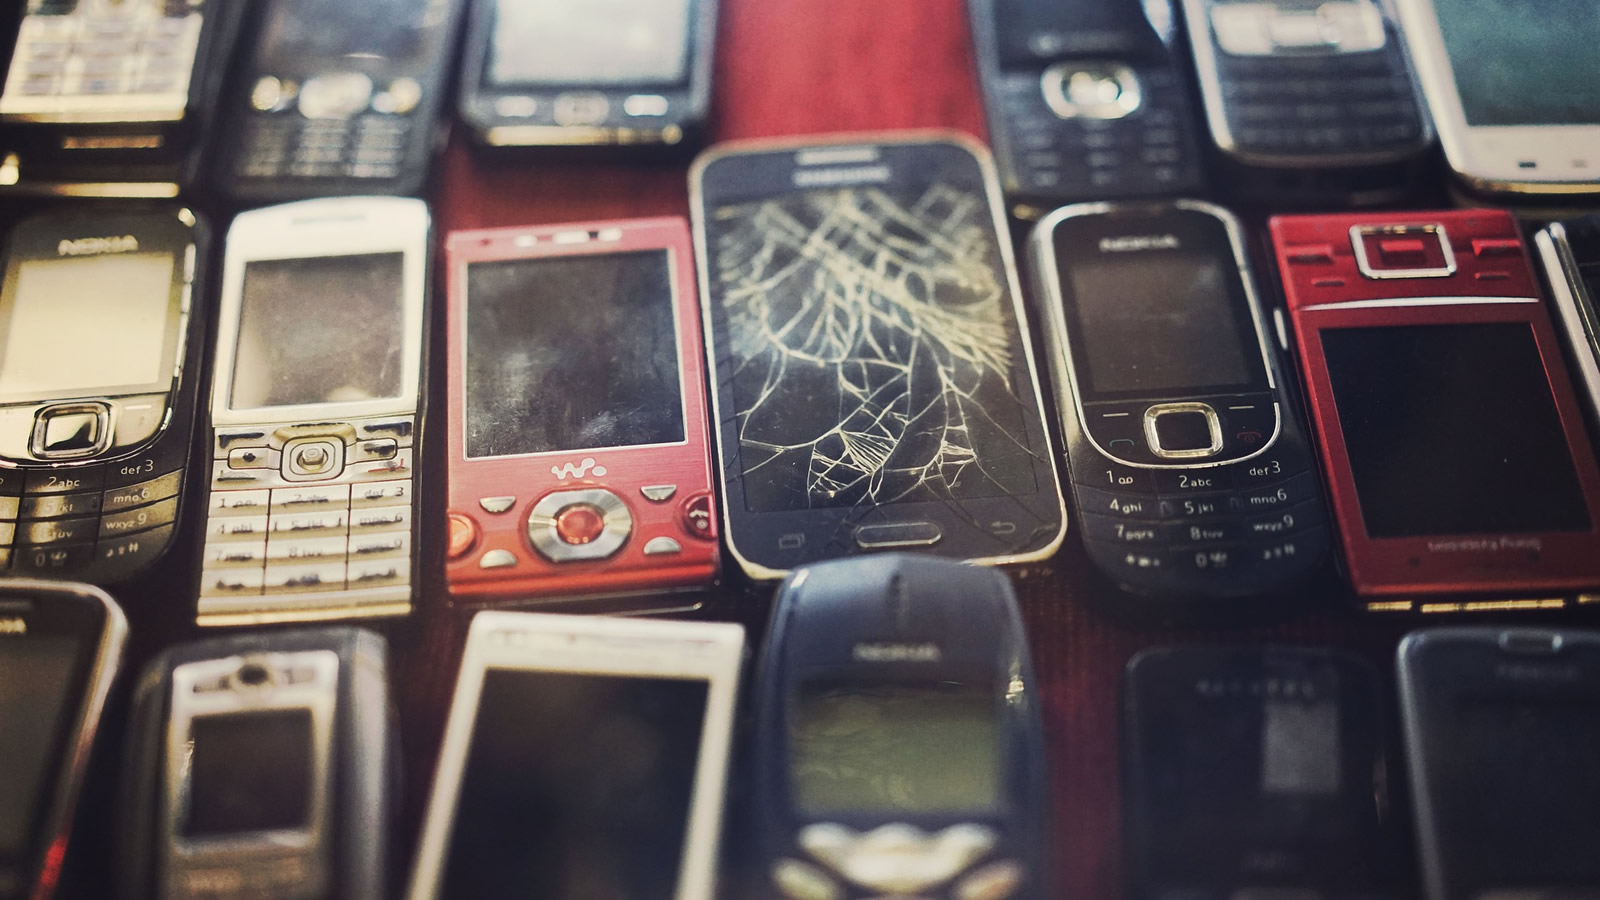 <h4>GROWING ELECTRONIC WASTE PROBLEM</h4><h5>Discarded phones, TVs, computers and other electronics (often called “e-waste”) is the nation’s fastest growing portion of the municipal waste stream.</h5><em>Pixabay.com</em>